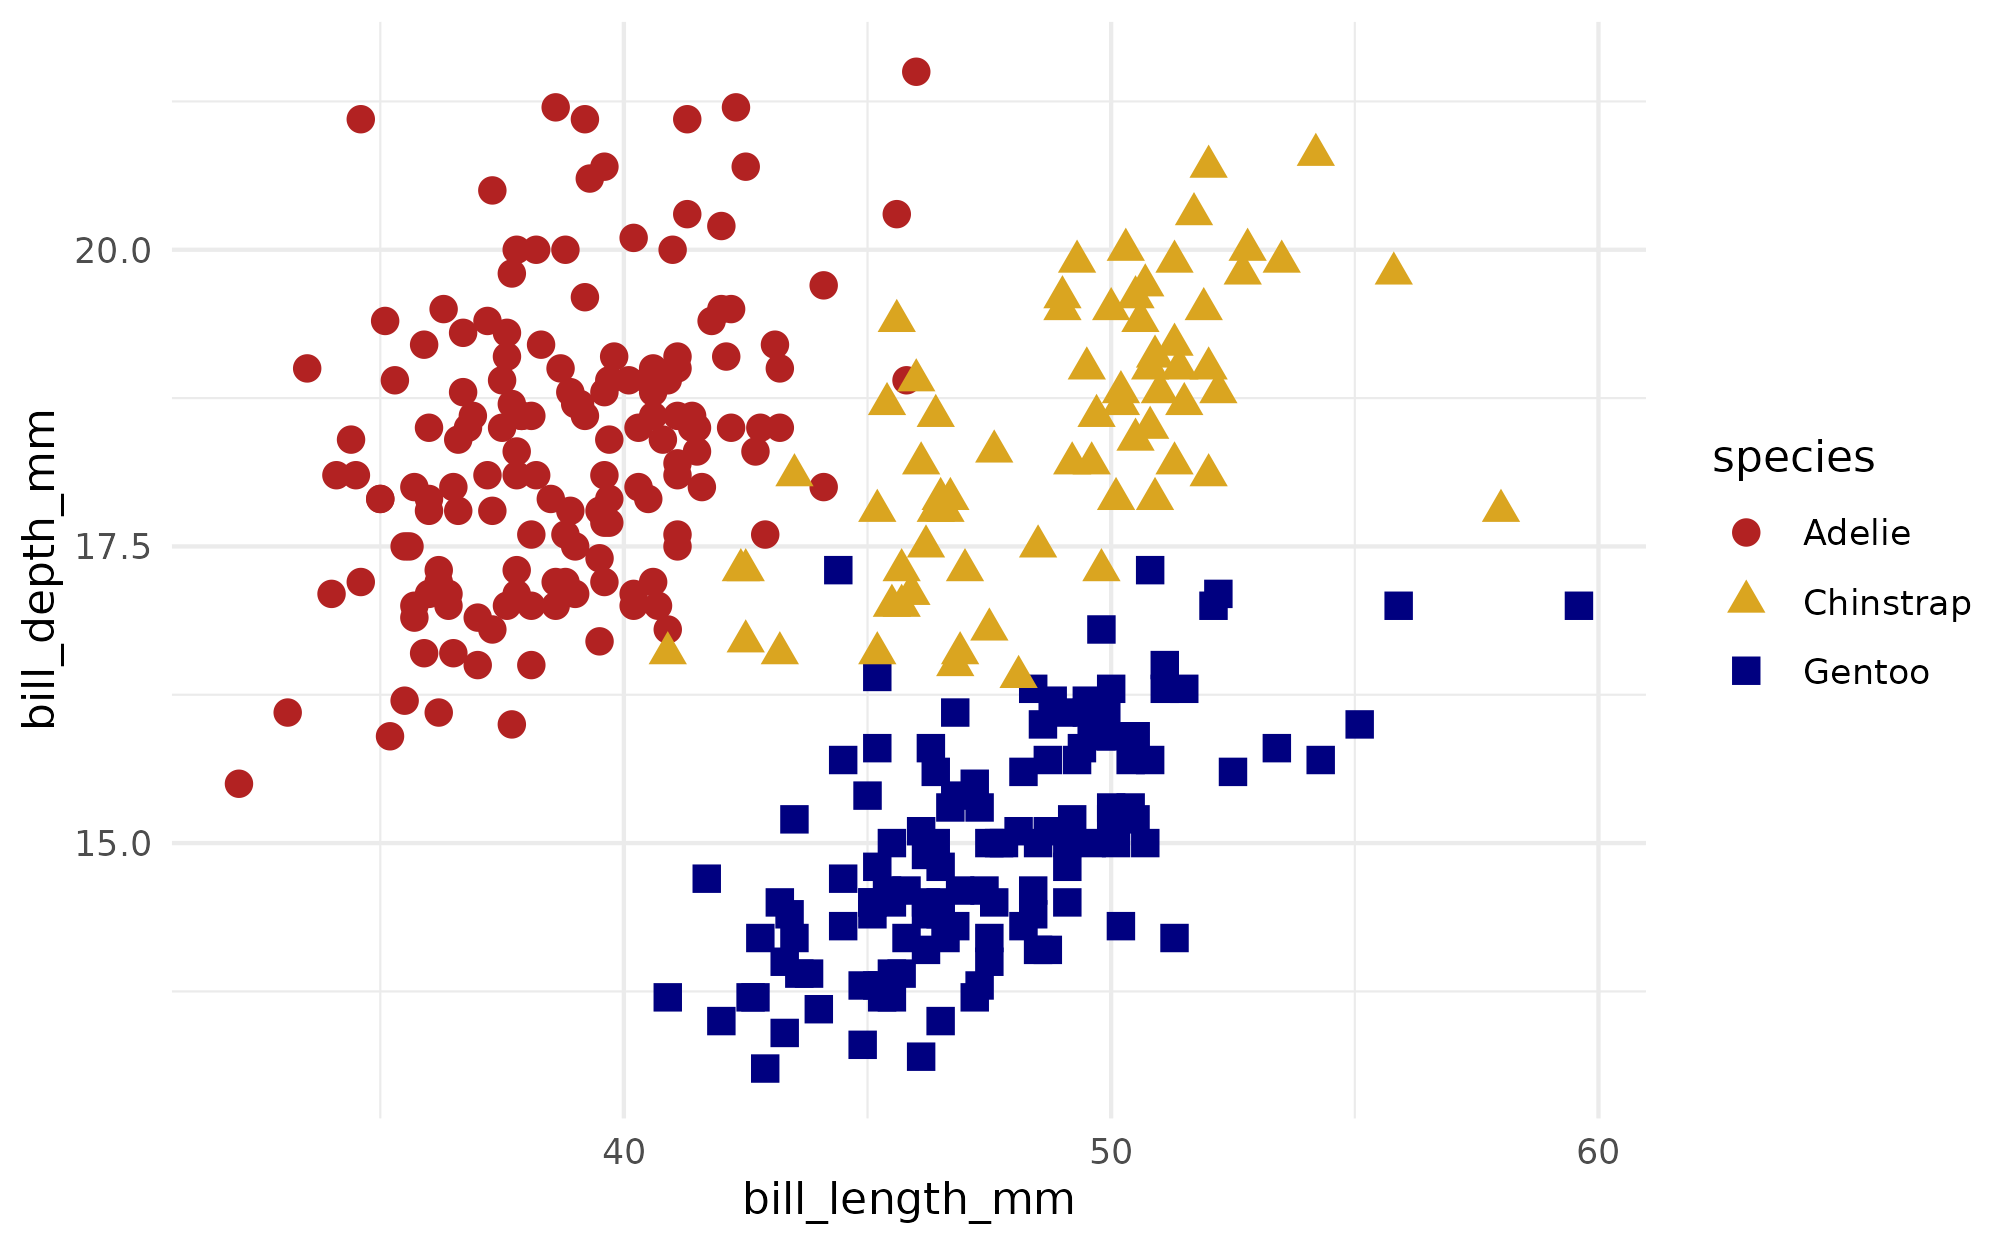 A scatter plot with bill length on the x-axis and bill depth on the y-axis. The shape and color of the points correspond to the species of penguin, with colors derived from our custom color palette. Adelie penguins are shown in red circles, Chinstrap penguins in yellow triangles, and Gentoo penguins in blue squares.